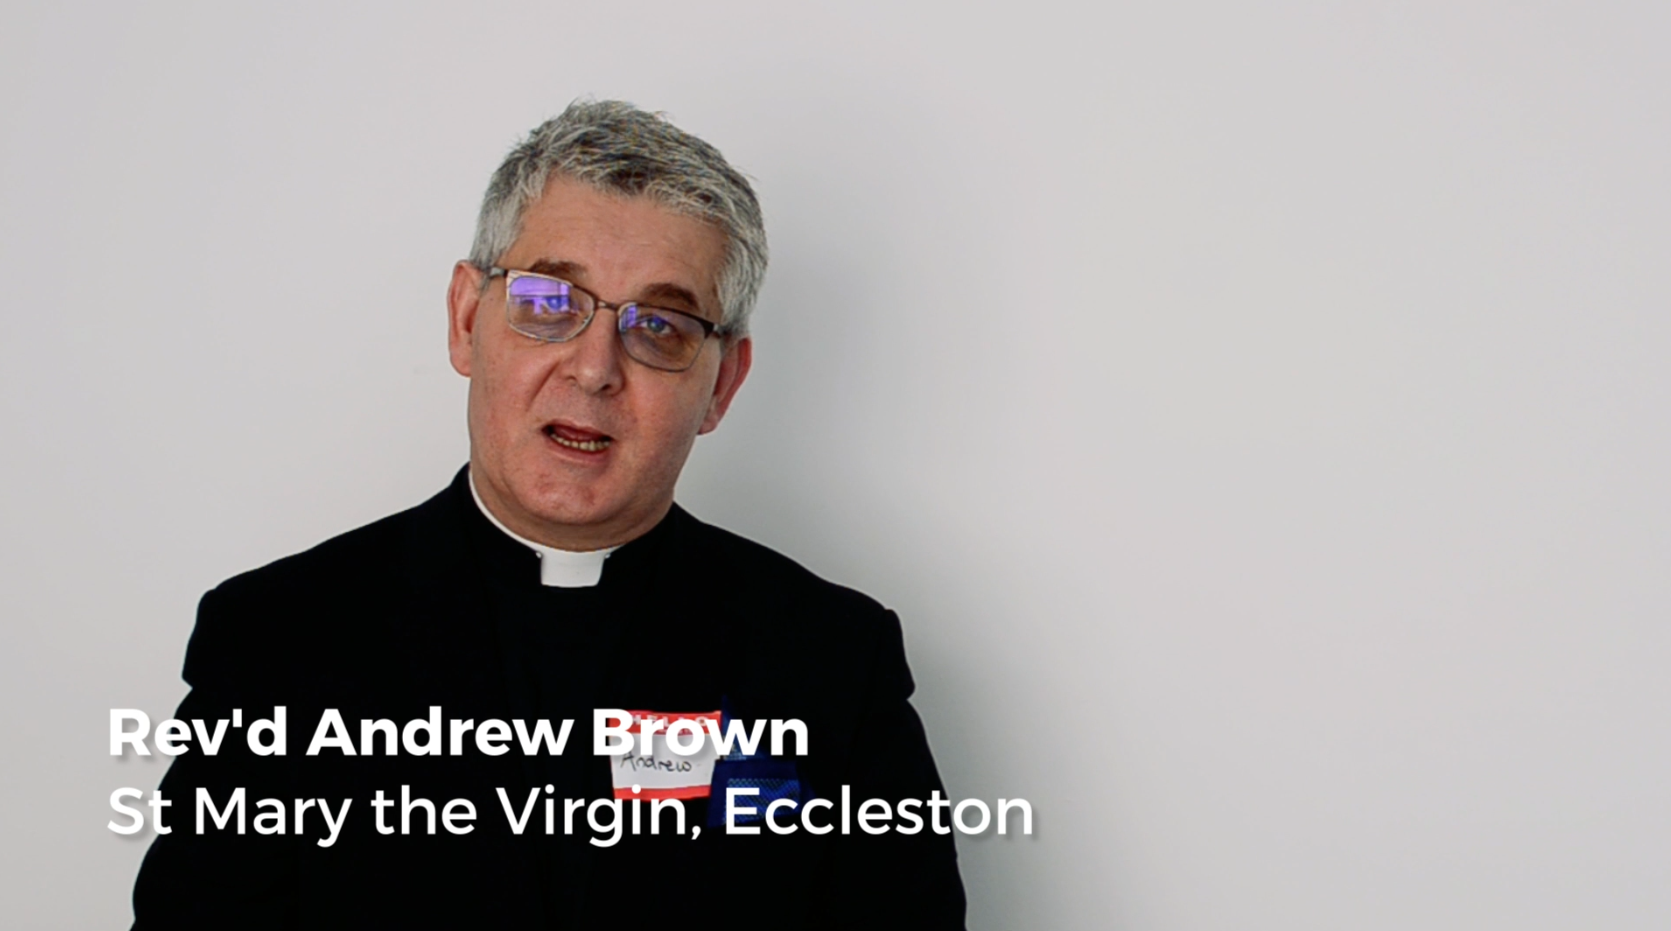 Father Andrew Brown